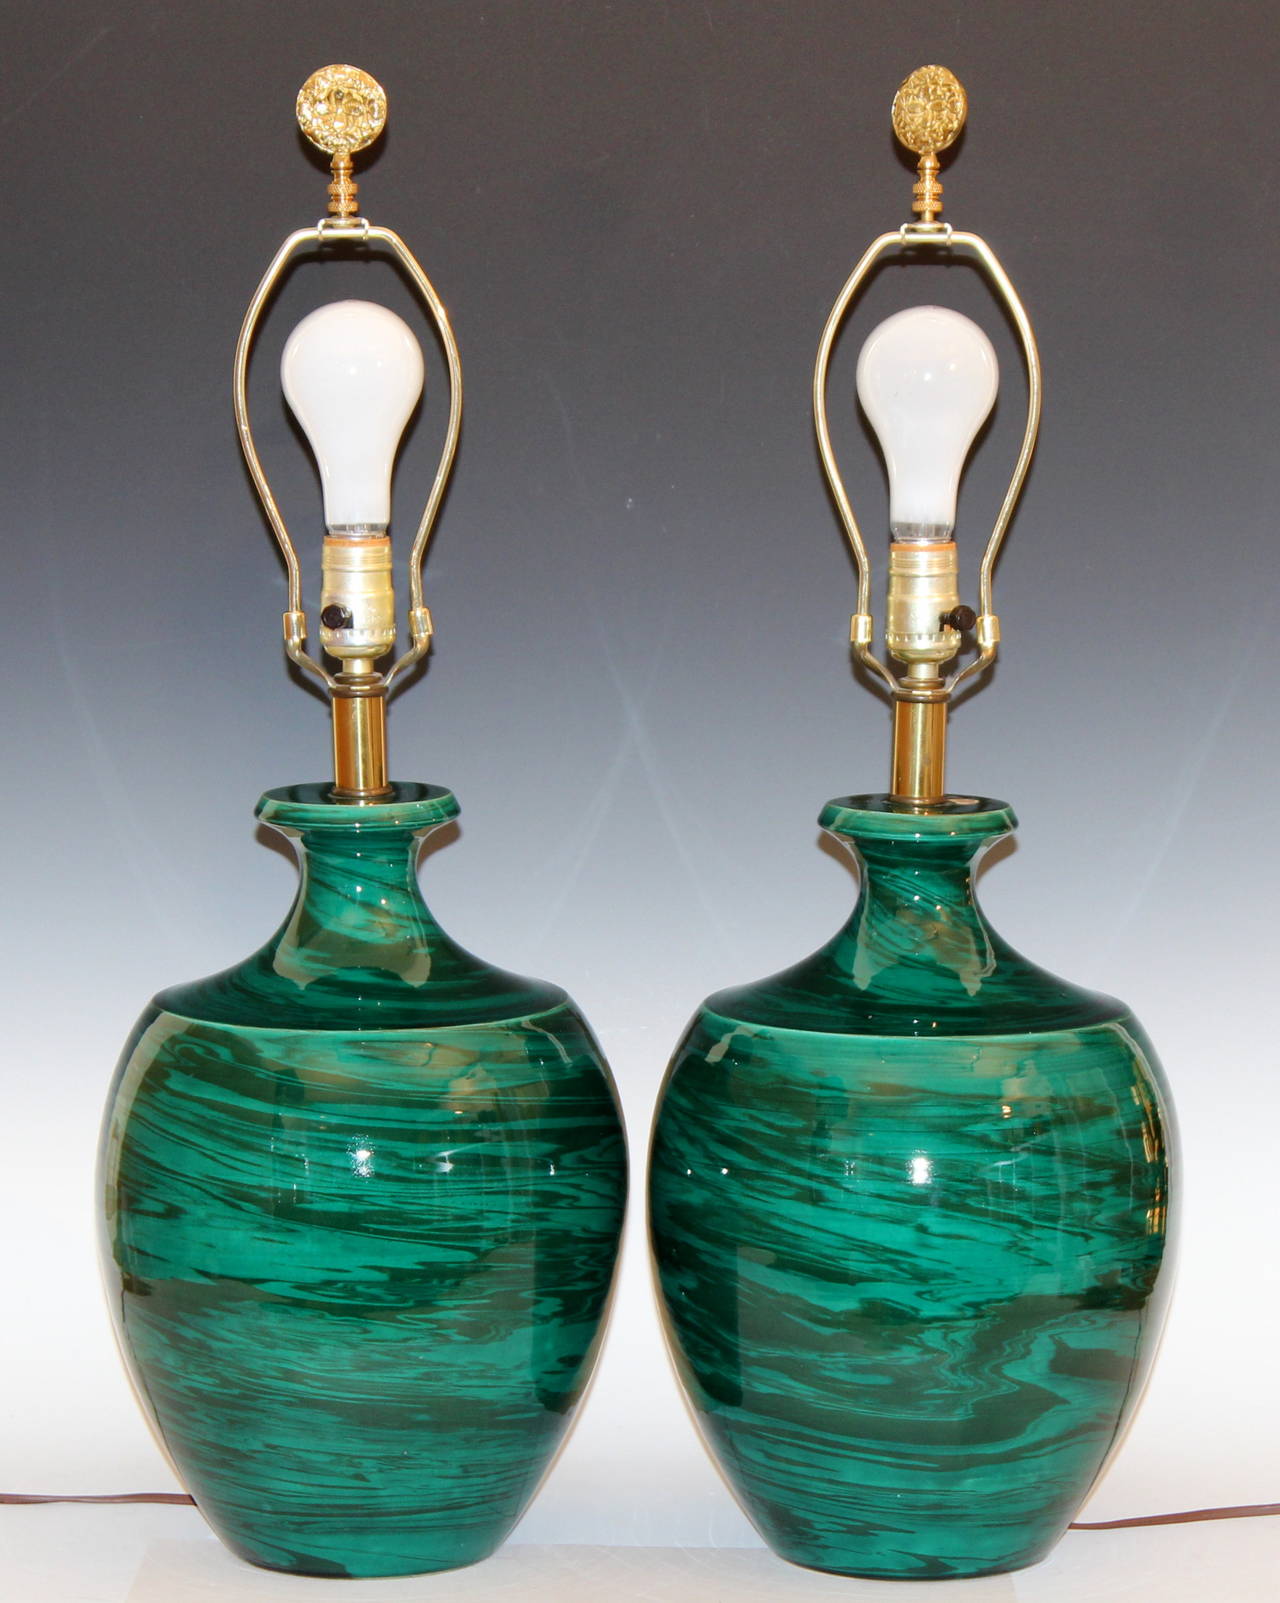 Great pair of vintage, hand thrown Bitossi green marbleized pottery lamps, circa 1970s. 28